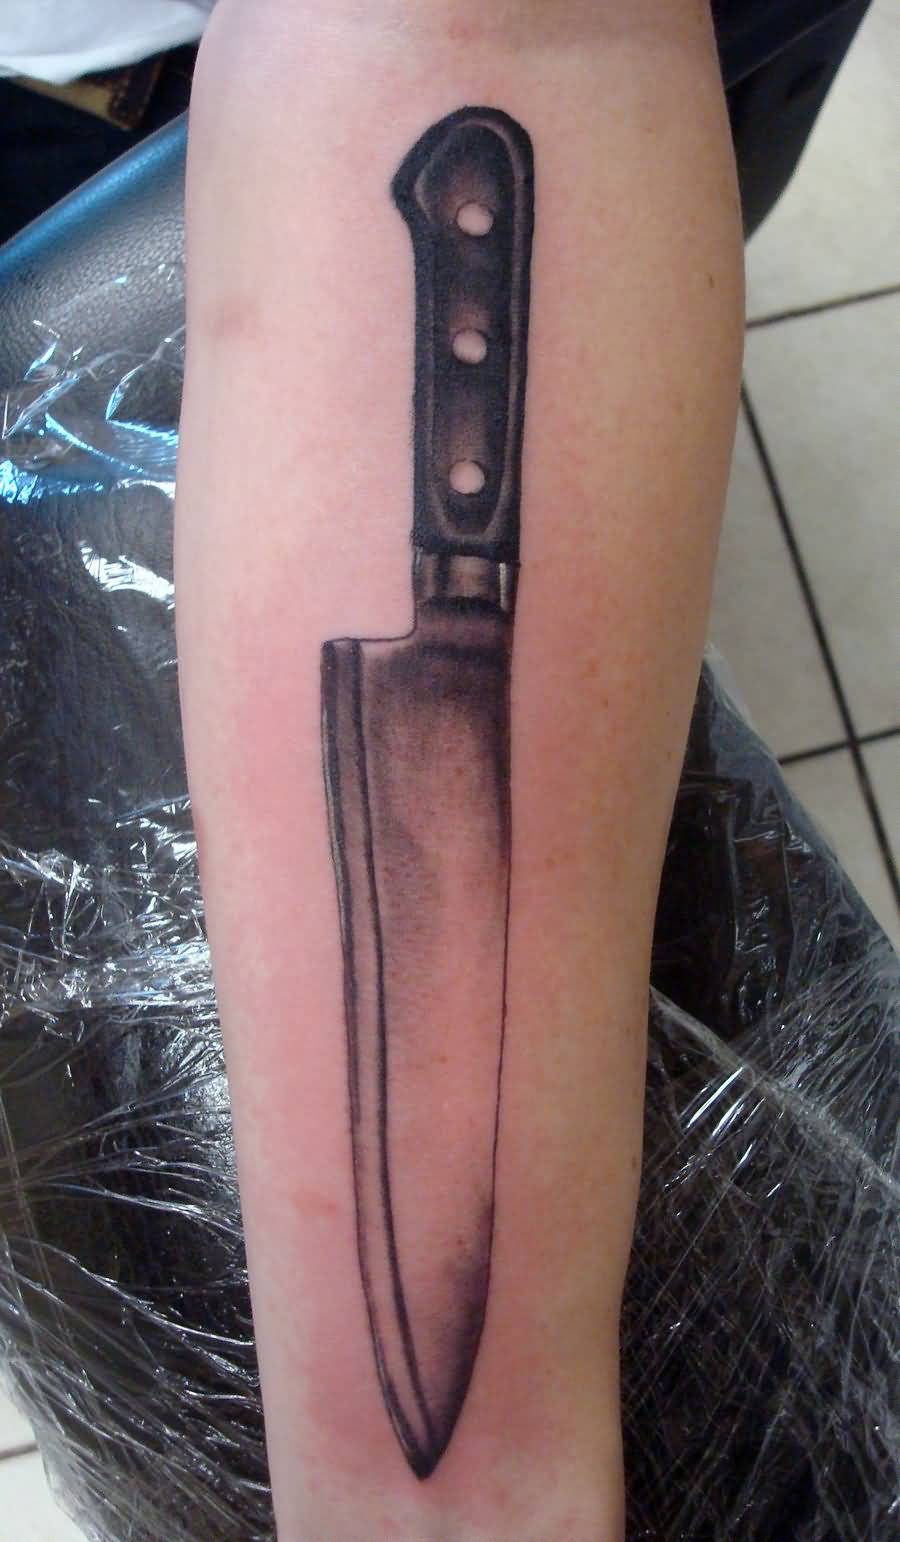 Traditional Chef Knife Tattoo